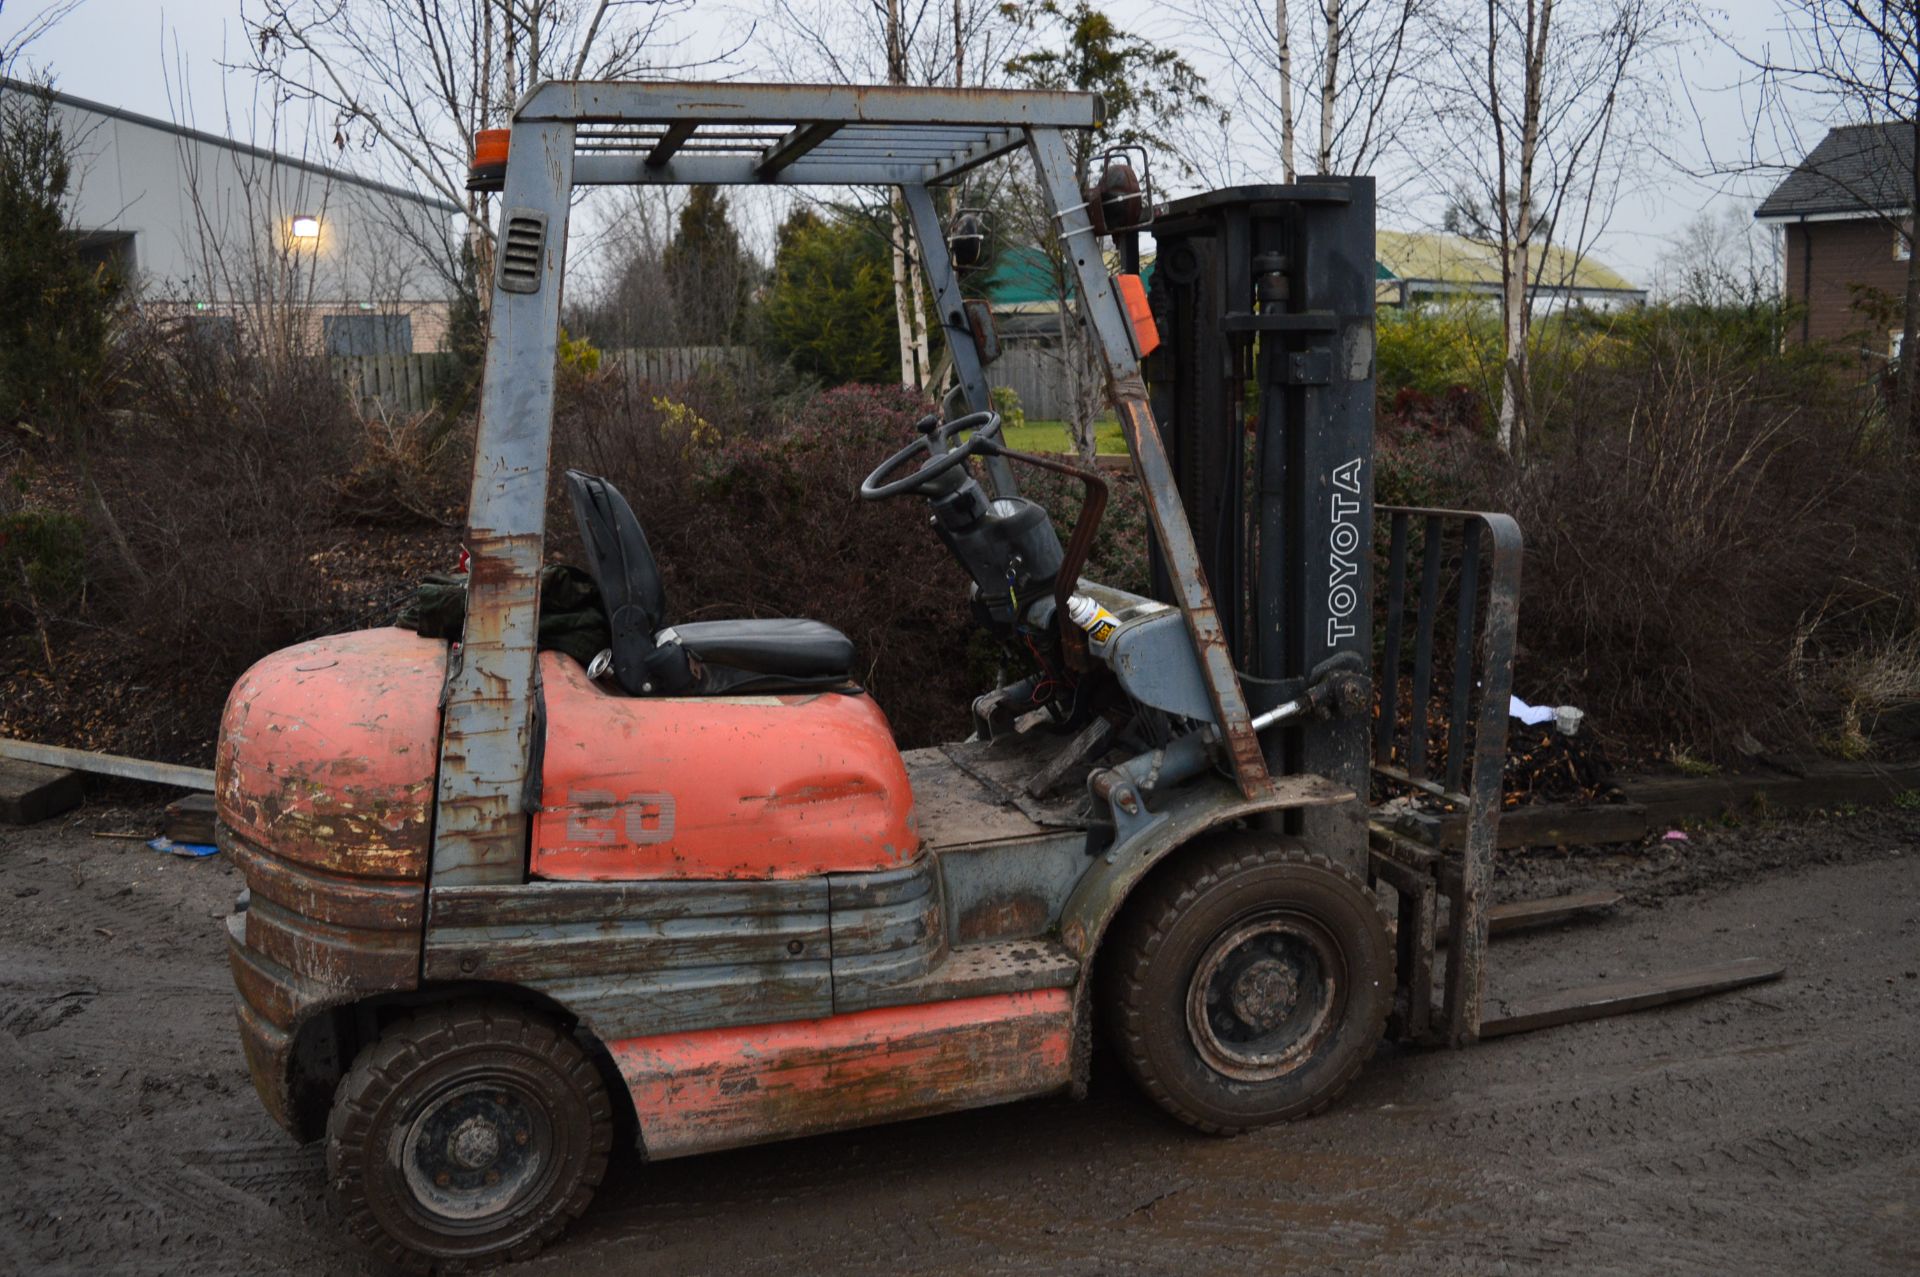 *Toyota 2 Tonne Diesel Forklift (Sideshift) (For Collection Monday 30th)